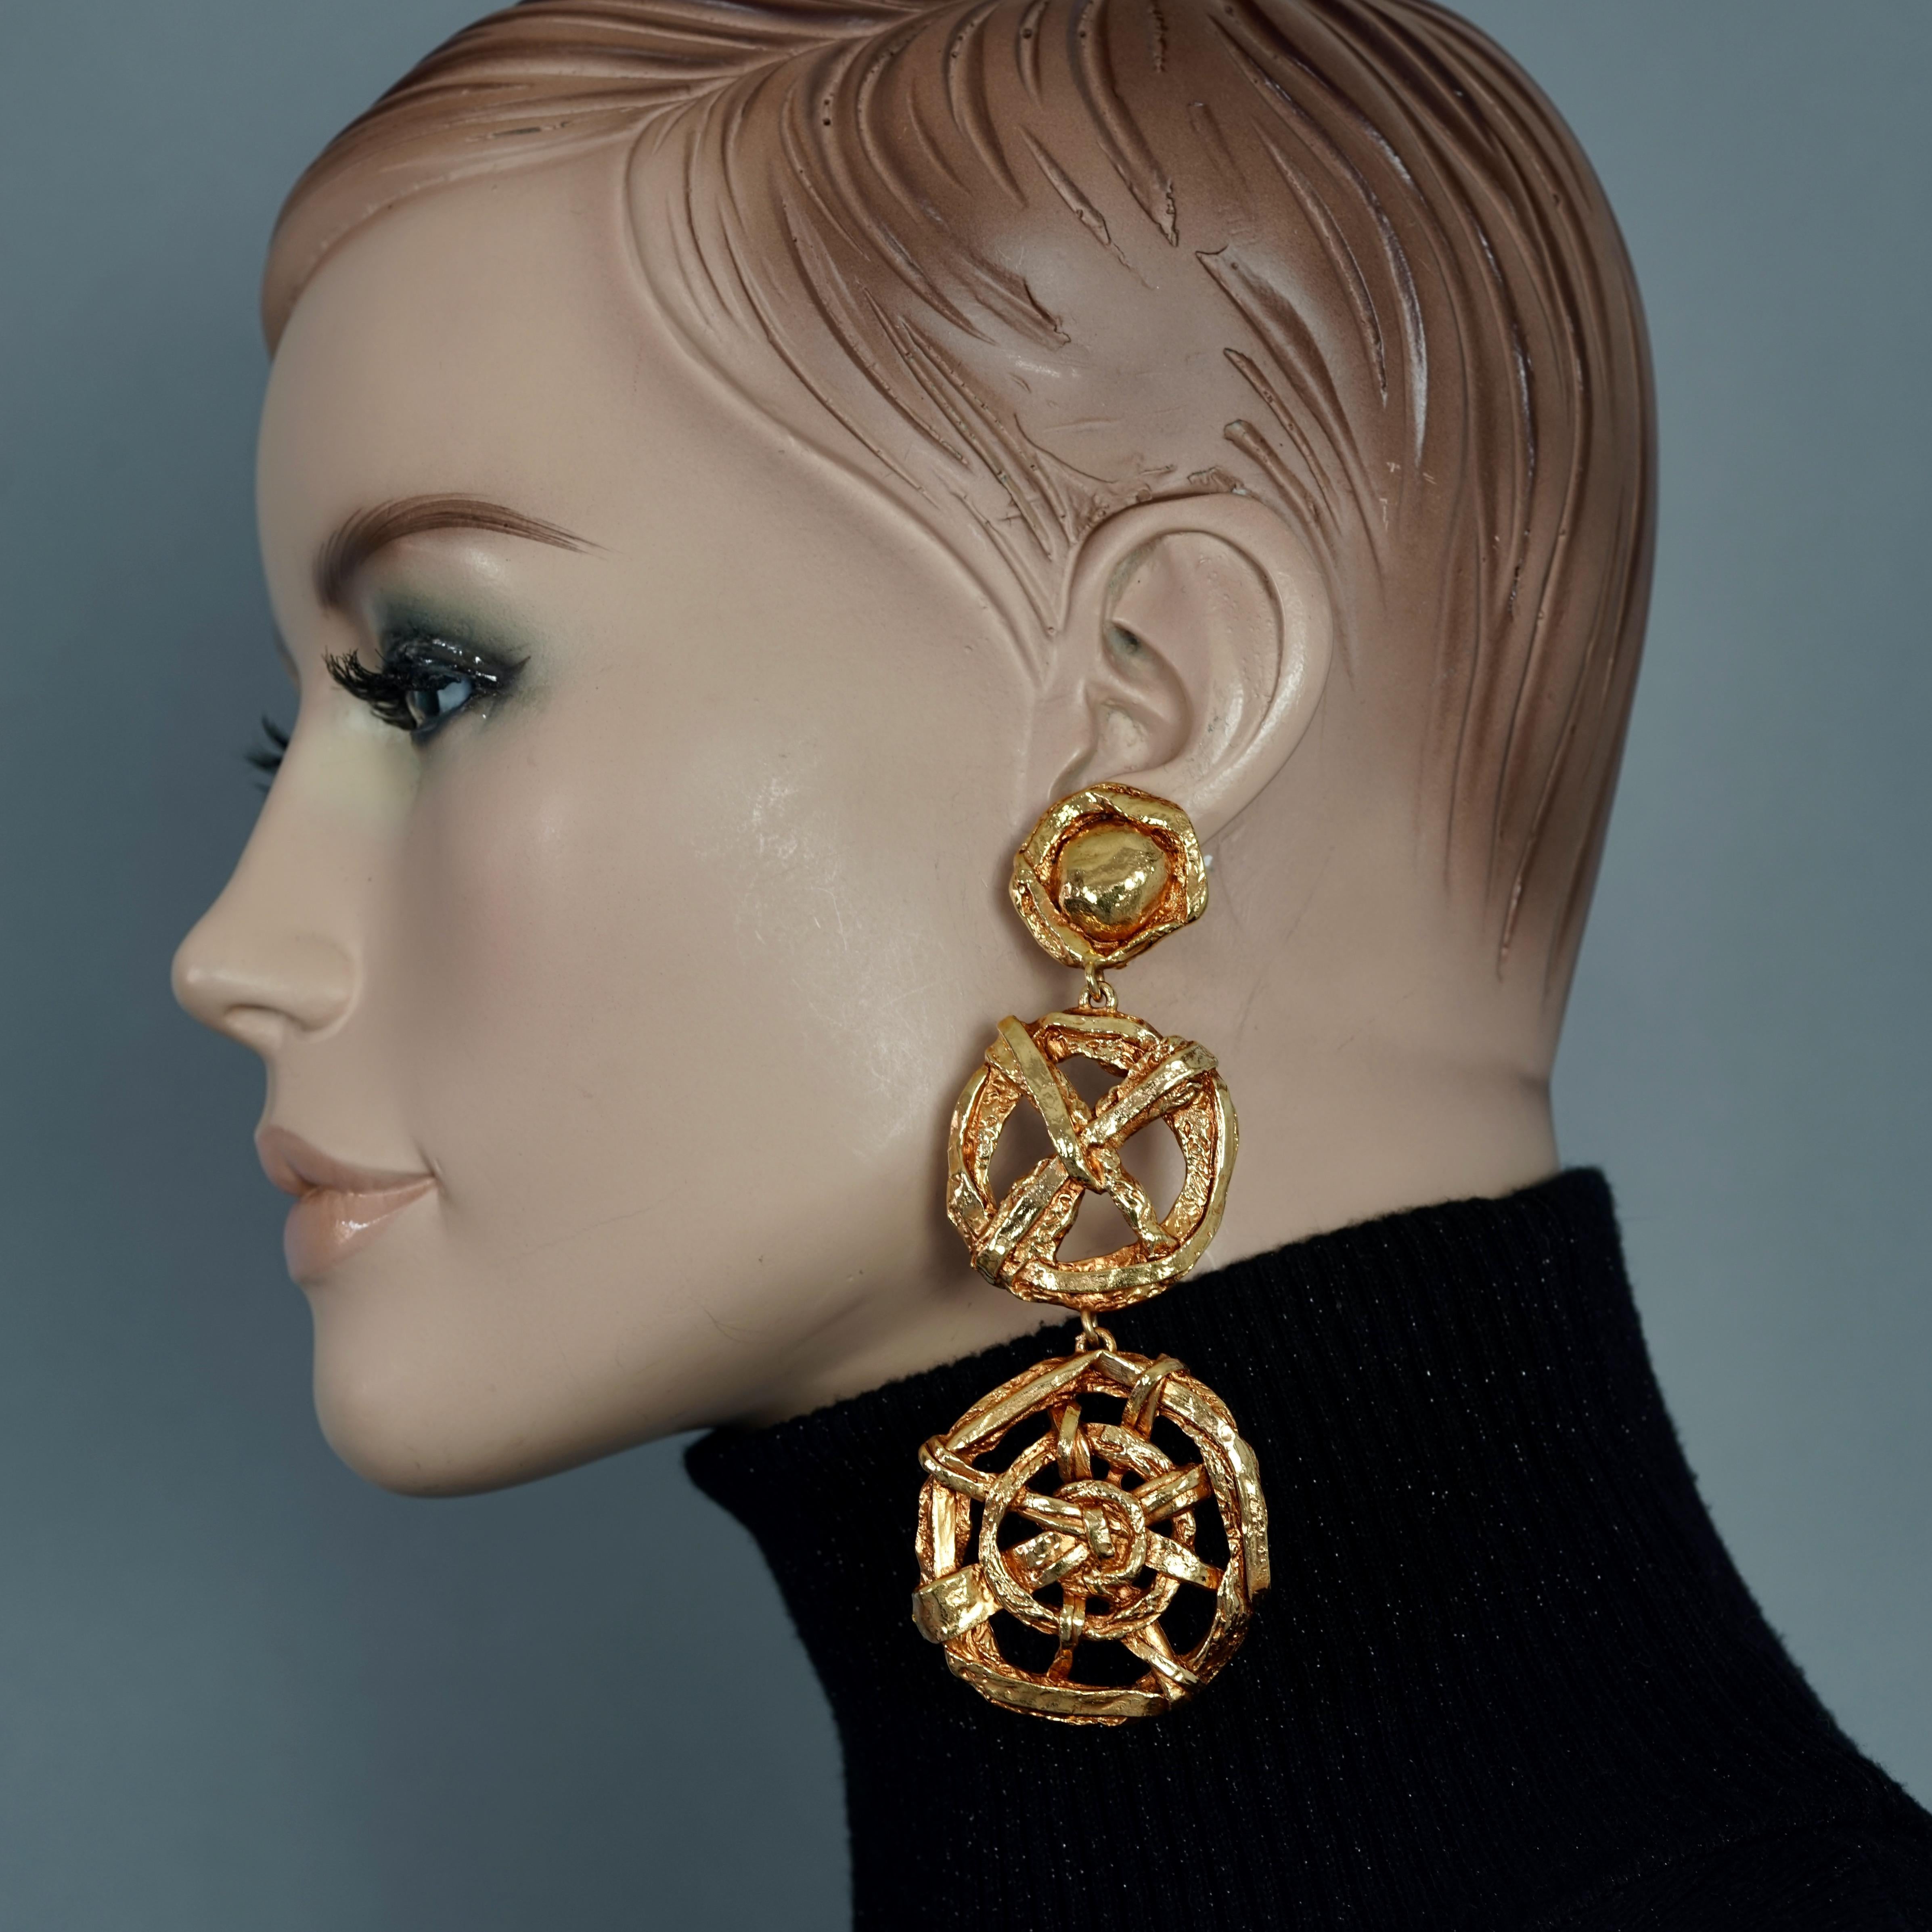 Vintage CHRISTIAN LACROIX 3 Tiered Nautical Wheel Dangling Earrings

Measurements:
Height: 2.12 inches (11 cm)
Width: 1.65 inches (4.5 cm)
Weight per Earring: 36 grams

Features:
- 100% Authentic CHRISTIAN LACROIX.
- 3 Tiered nautical wheel dangling